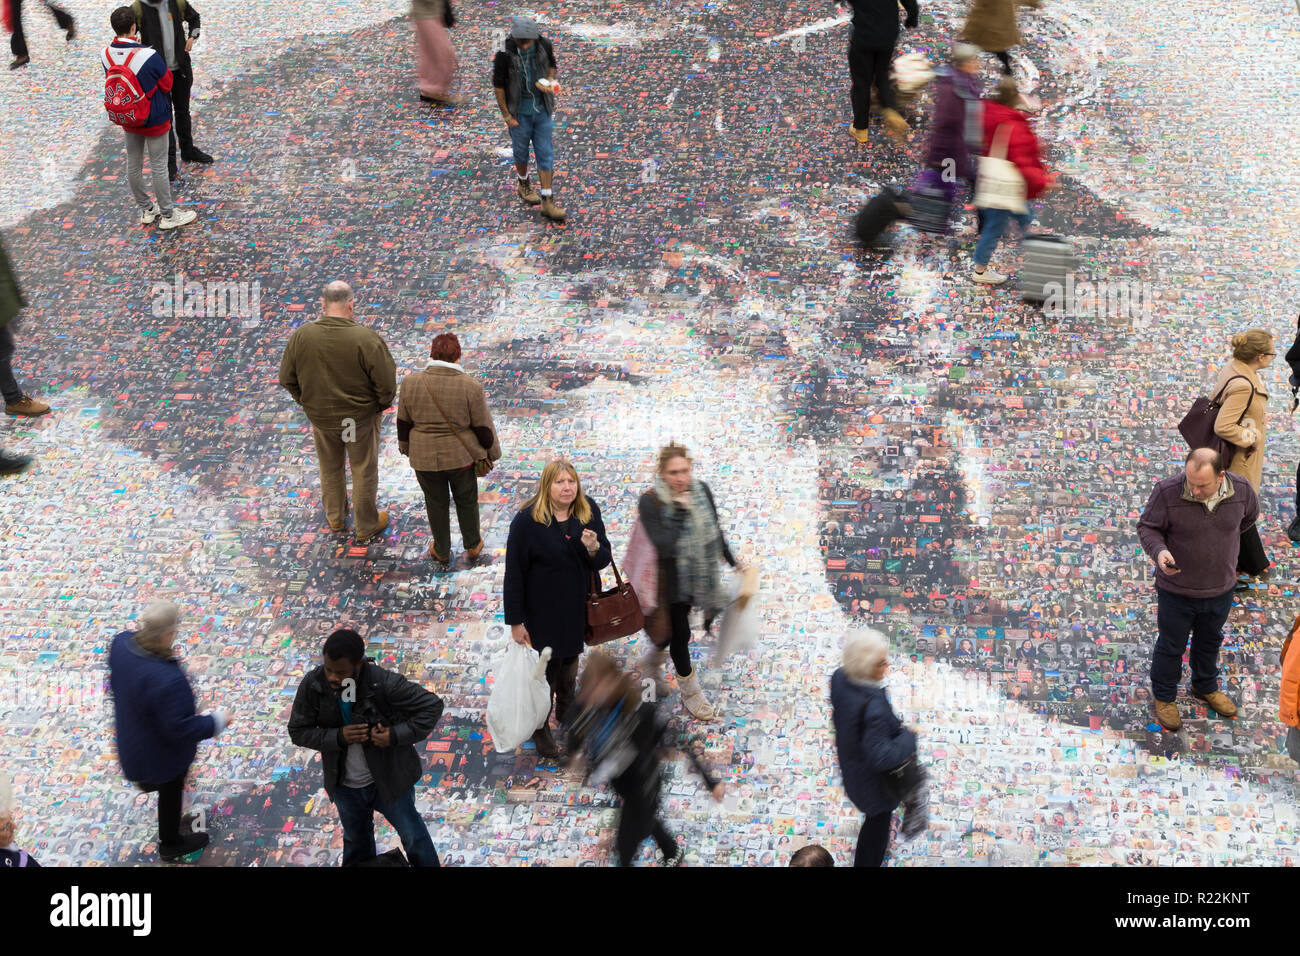 Birmingham, UK. 16th November, 2018. A large-scale mosaic portrait of sufragette Hilda Burkitt is on show on the concourse floor of New Street station, Birmingham. The 20 metre portrait is made up of 3,724 selfie photographs and other photographs of women sent in from all over the UK. The project, called Face of Suffrage, is deisgned by artist Helen Marshall. Hilda Burkitt was born in Wolverhampton in 1876, was convicted and jailed for breaking a window in the then Prime Minister's train carriage. Peter Lopeman/Alamy Live News Stock Photo